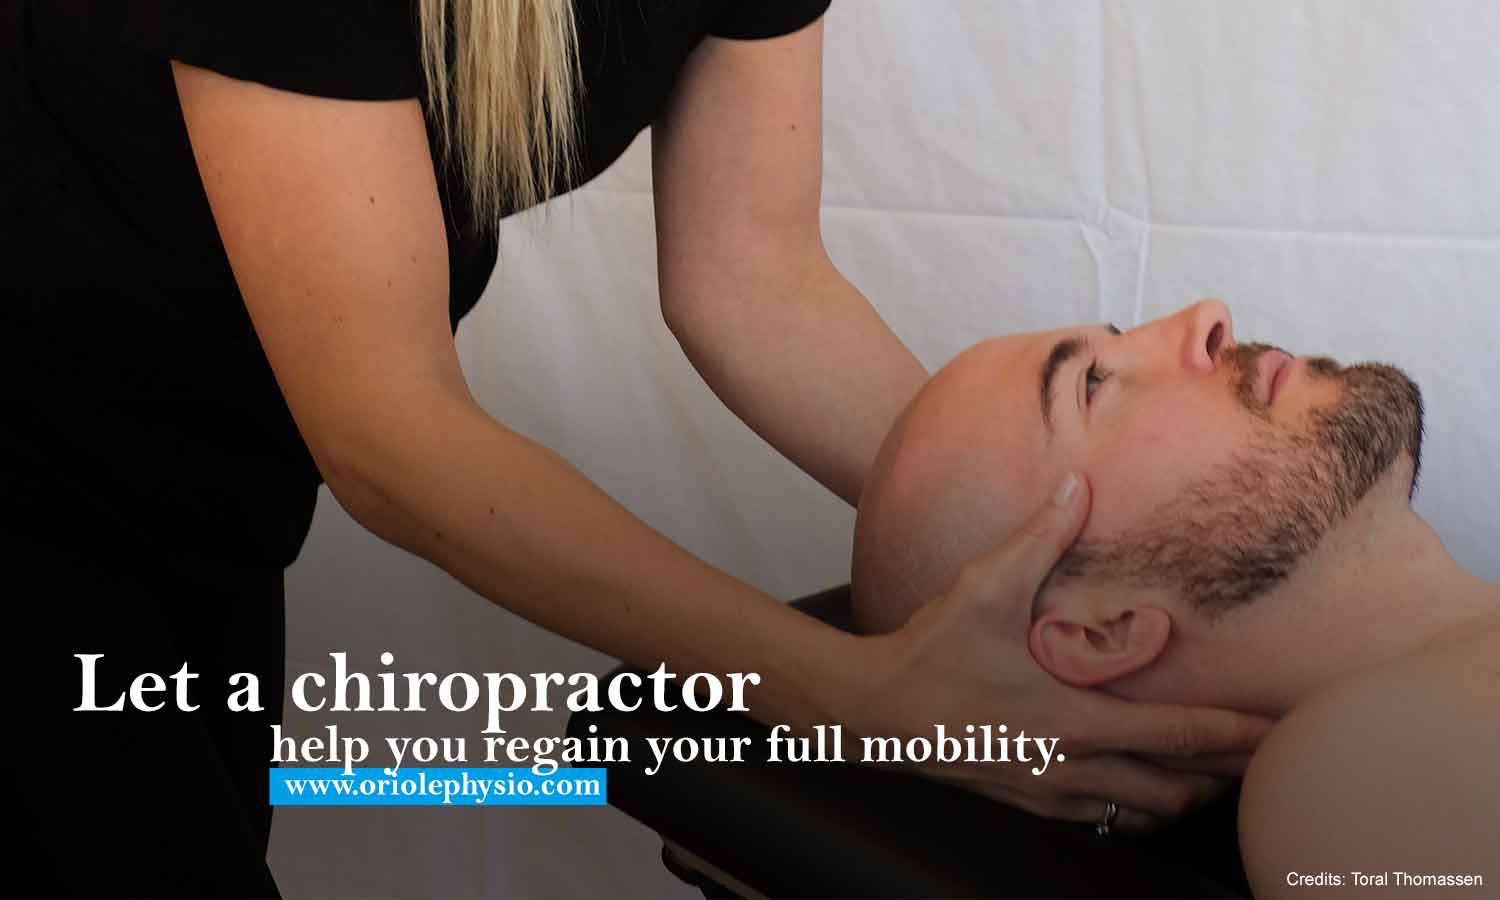 Let a chiropractor help you regain your full mobility.